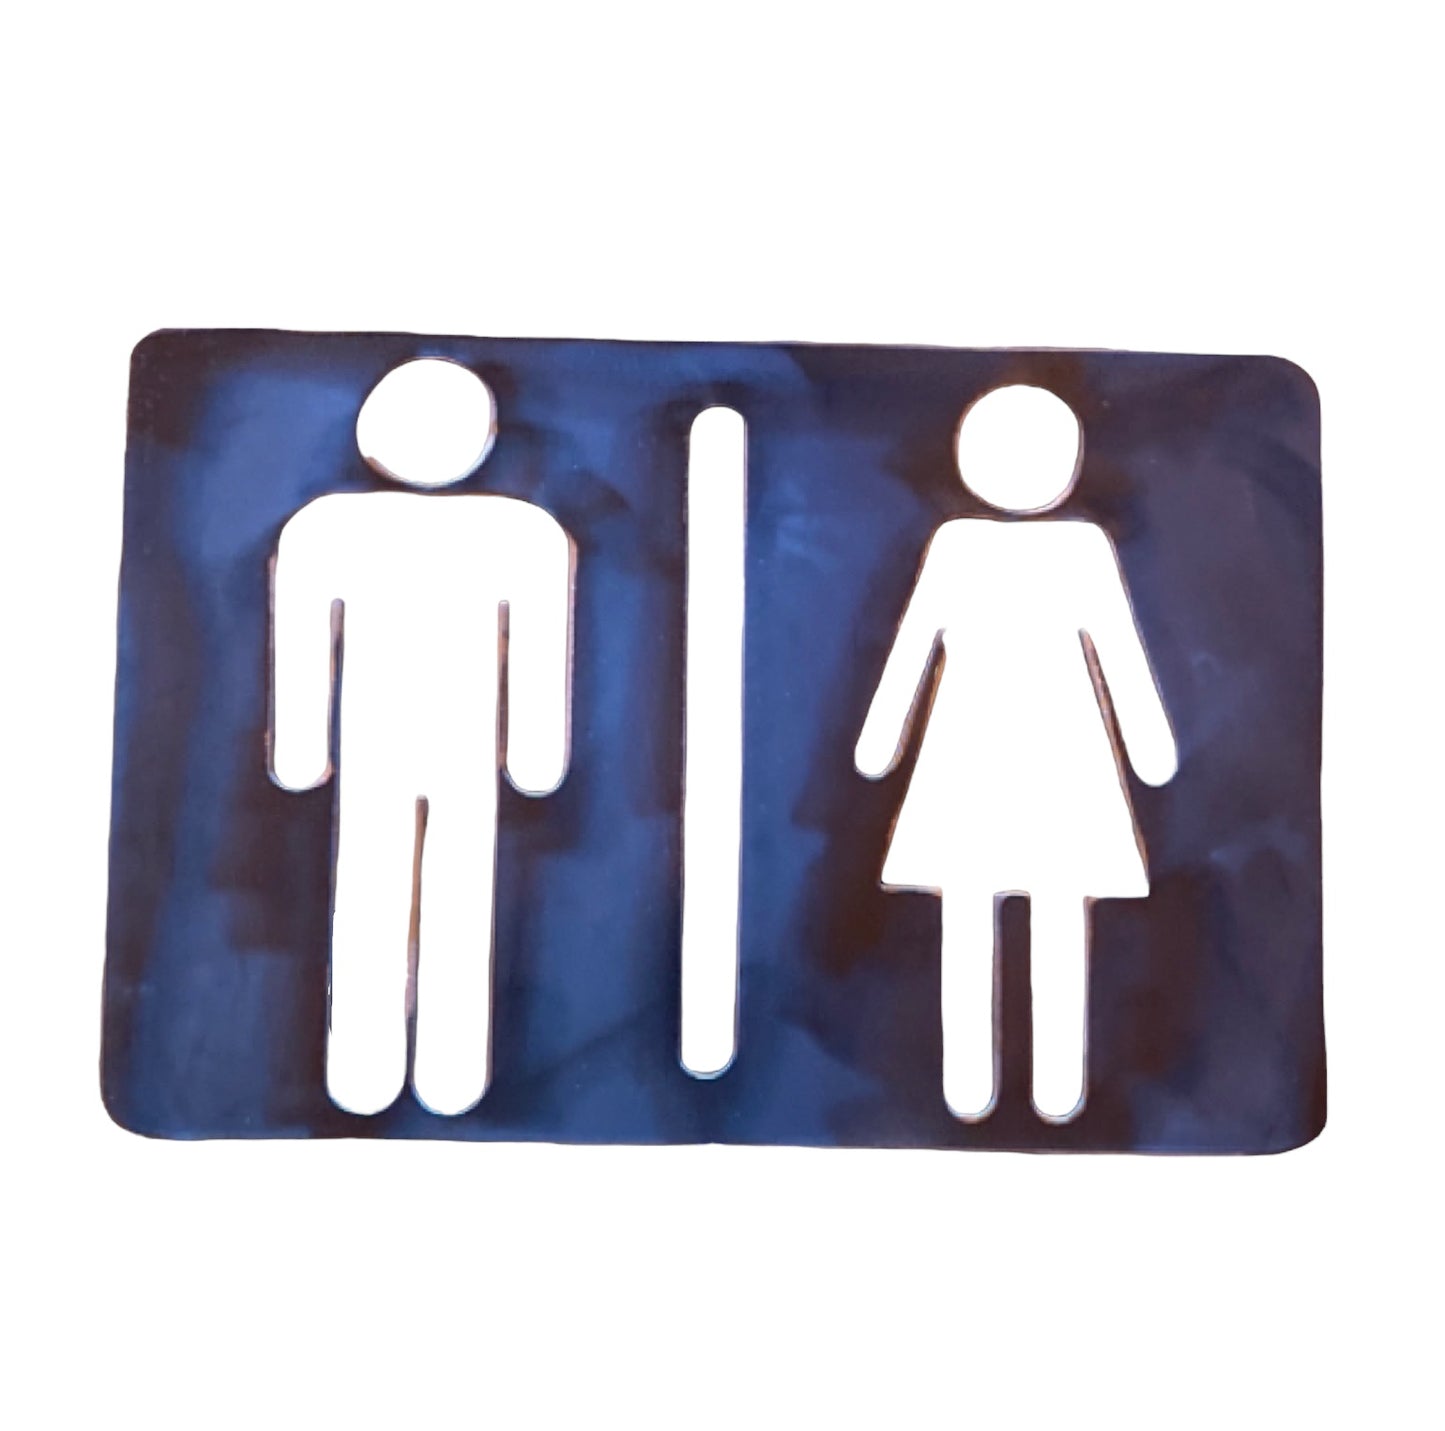 Toilet Male Female Steel Metal Sign - The Renmy Store Homewares & Gifts 